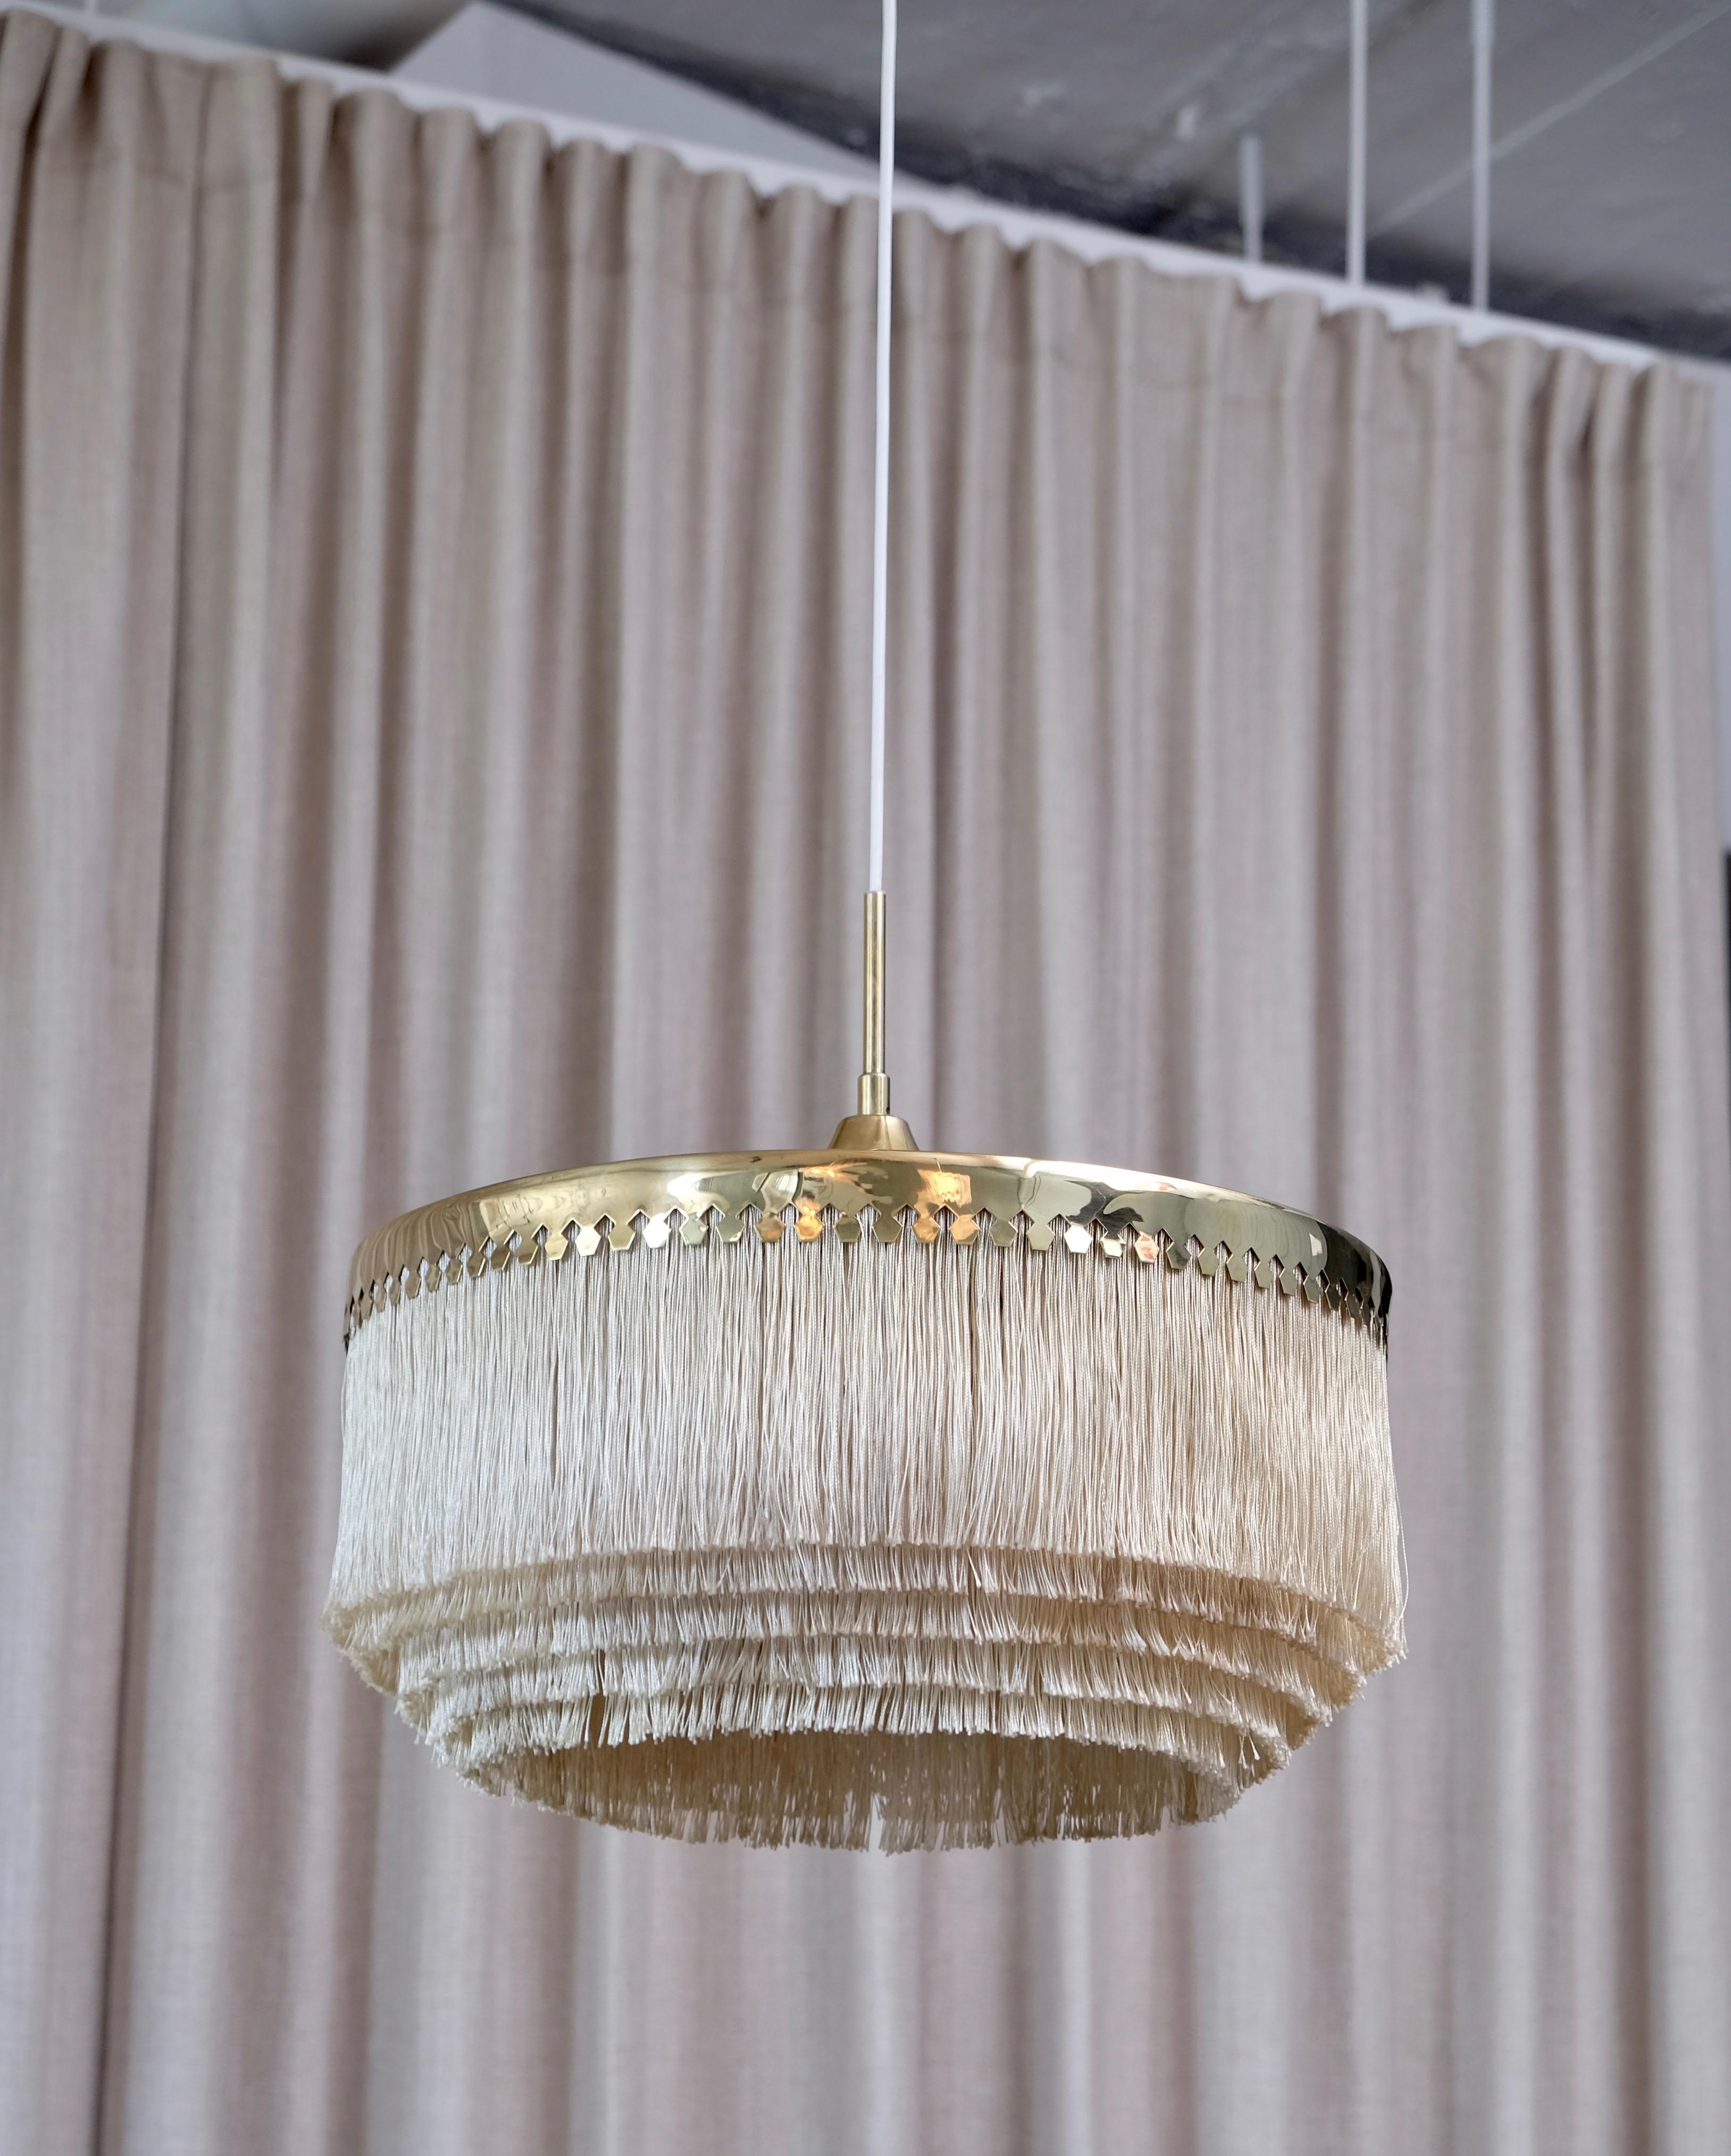 Very Rare Hans-Agne Jakobsson Ceiling Lamp, 1960s In Good Condition For Sale In Stockholm, SE